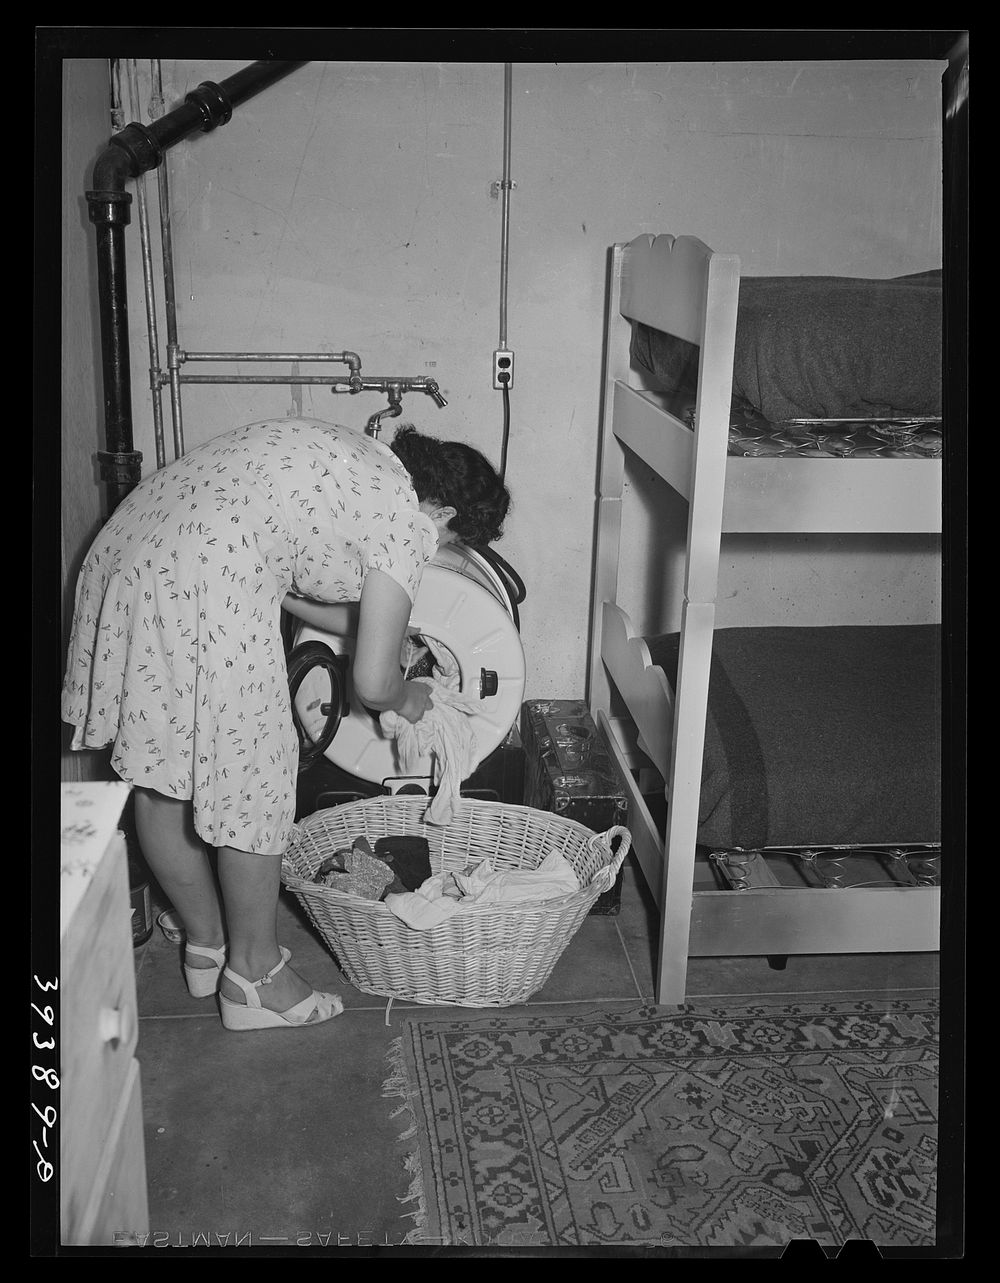 Room for maids who work in boarding house for single men who are mostly employed at the Consolidated Aircrafts. Notice the…